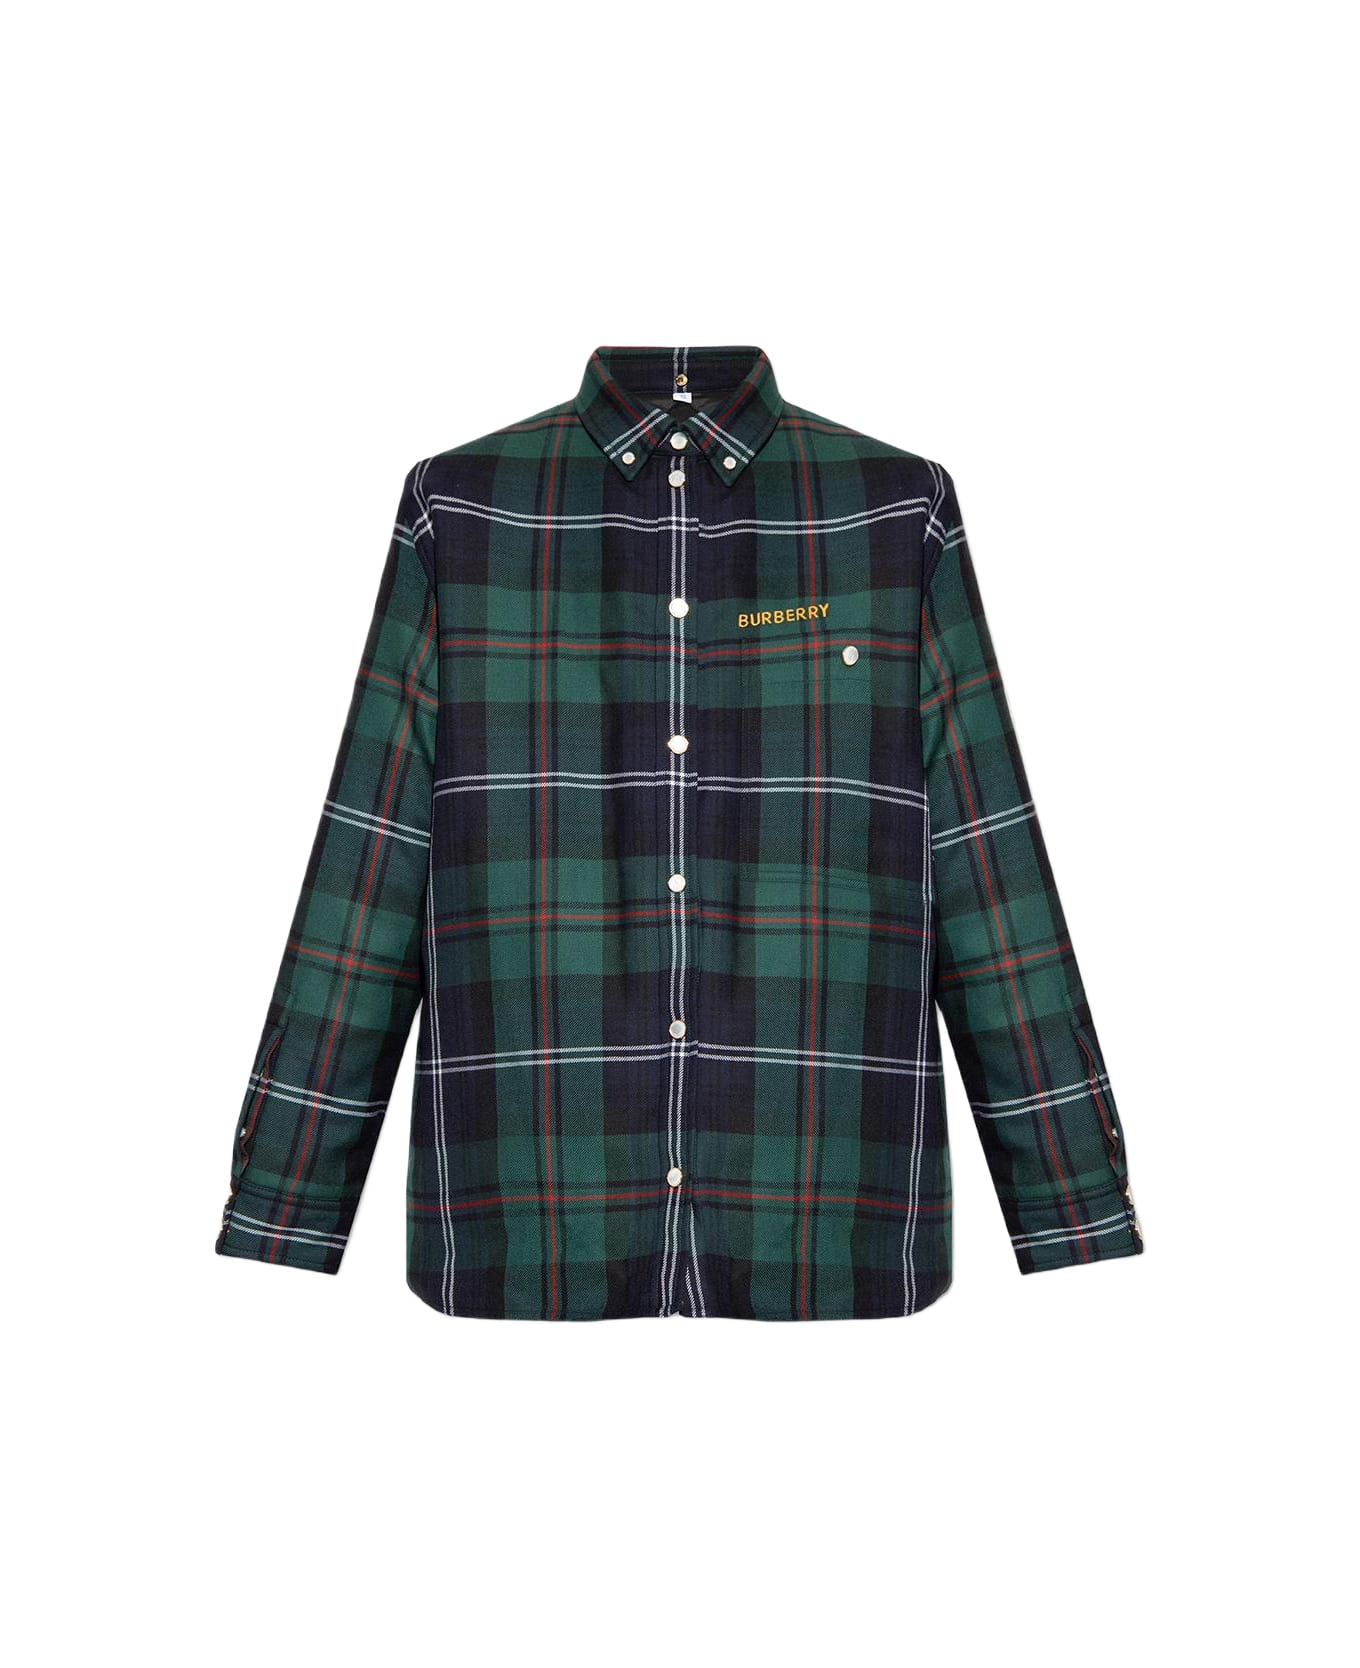 Burberry Oversize Two-piece Jacket - Green